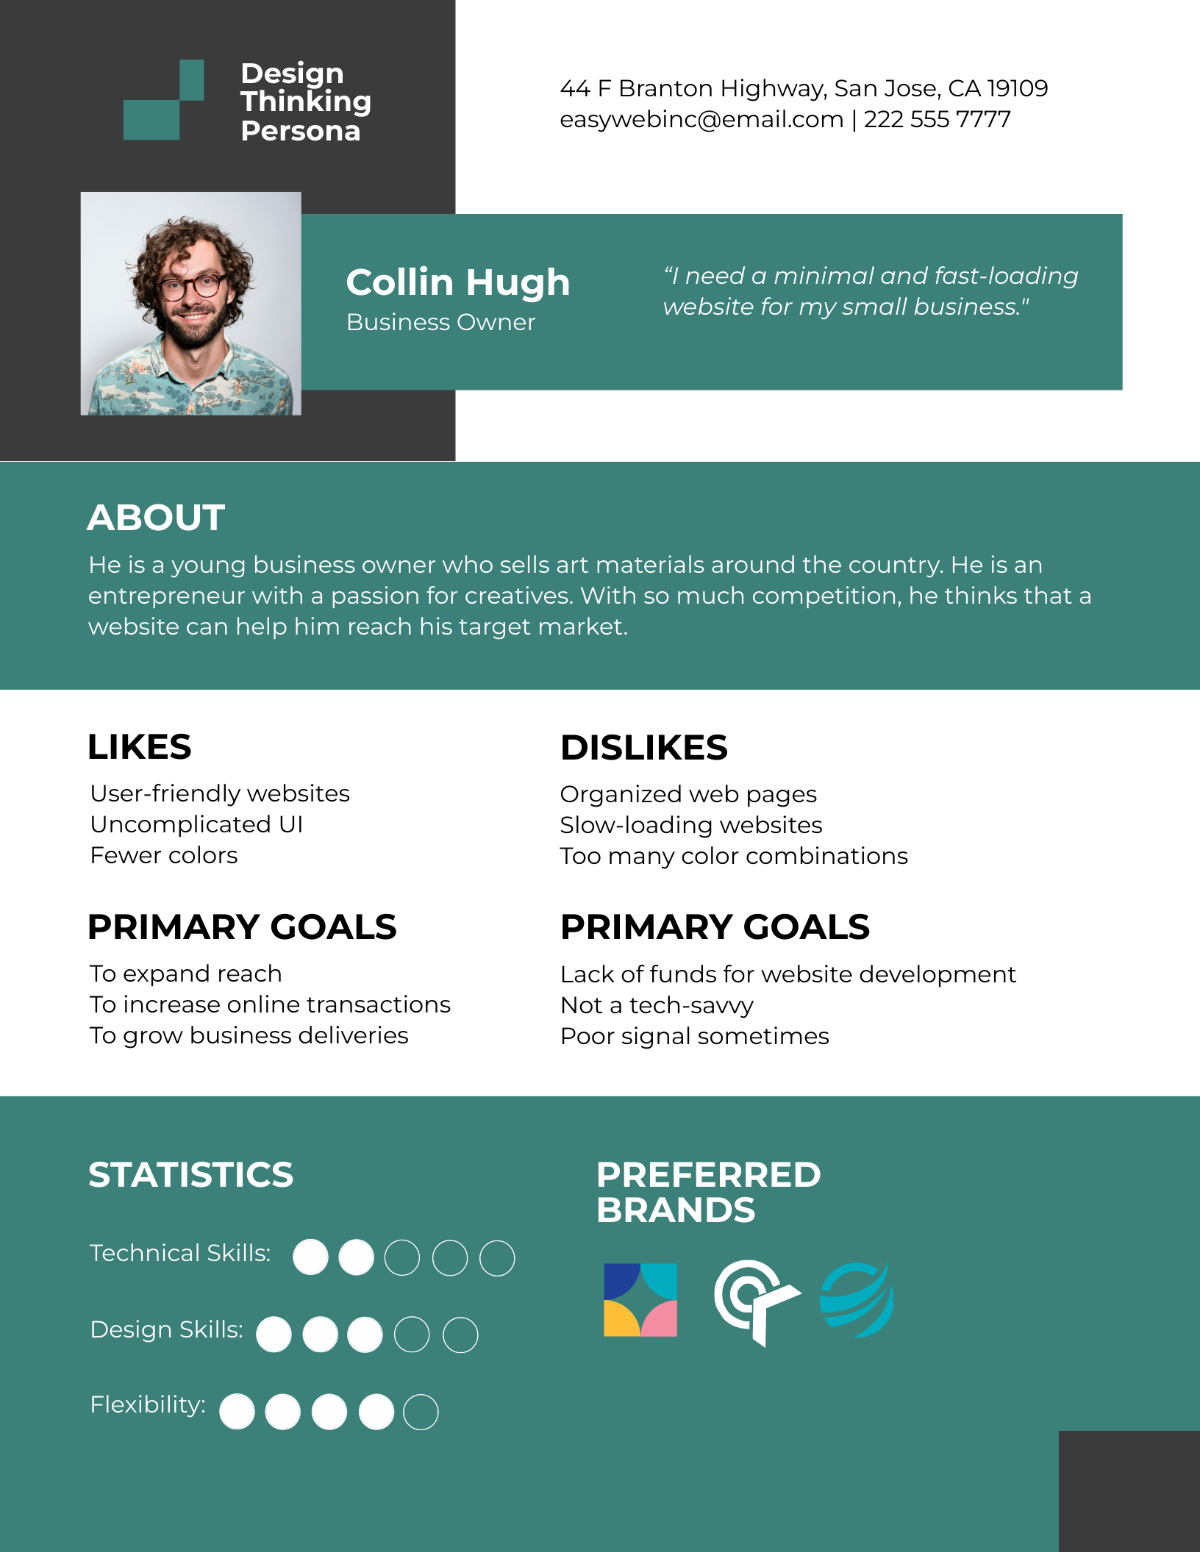 Free Design Thinking Persona Template